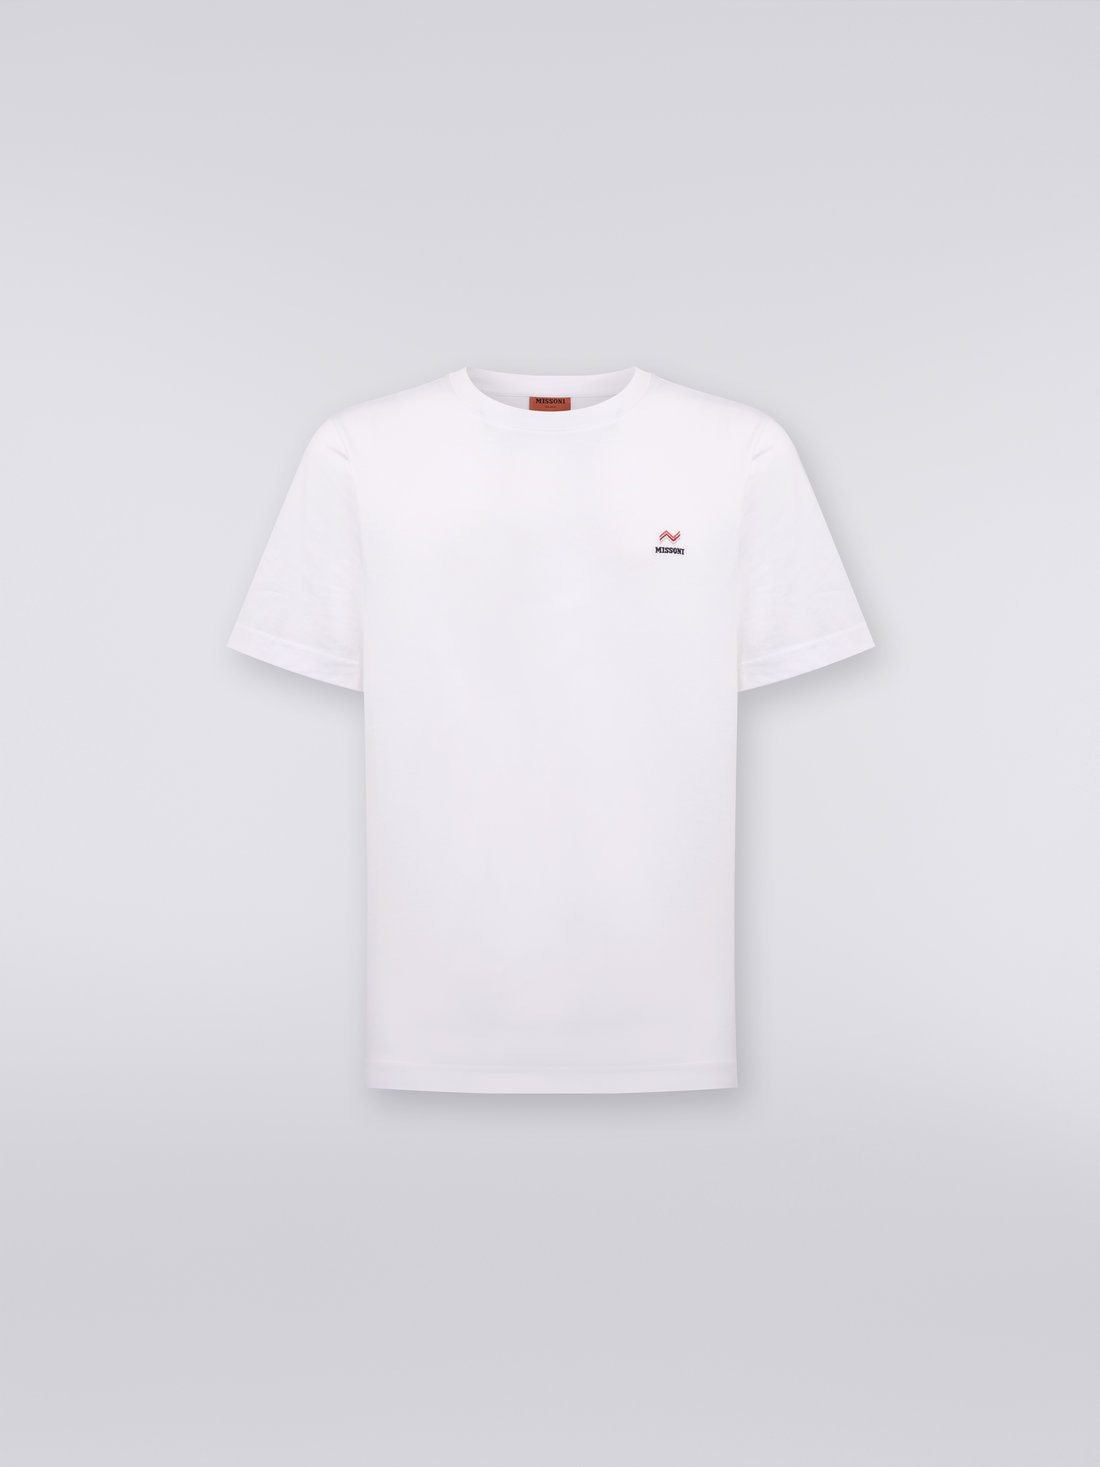 Crew-neck cotton T-shirt with embroidery and logo, White  - US23WL0KBJ00IE14001 - 0